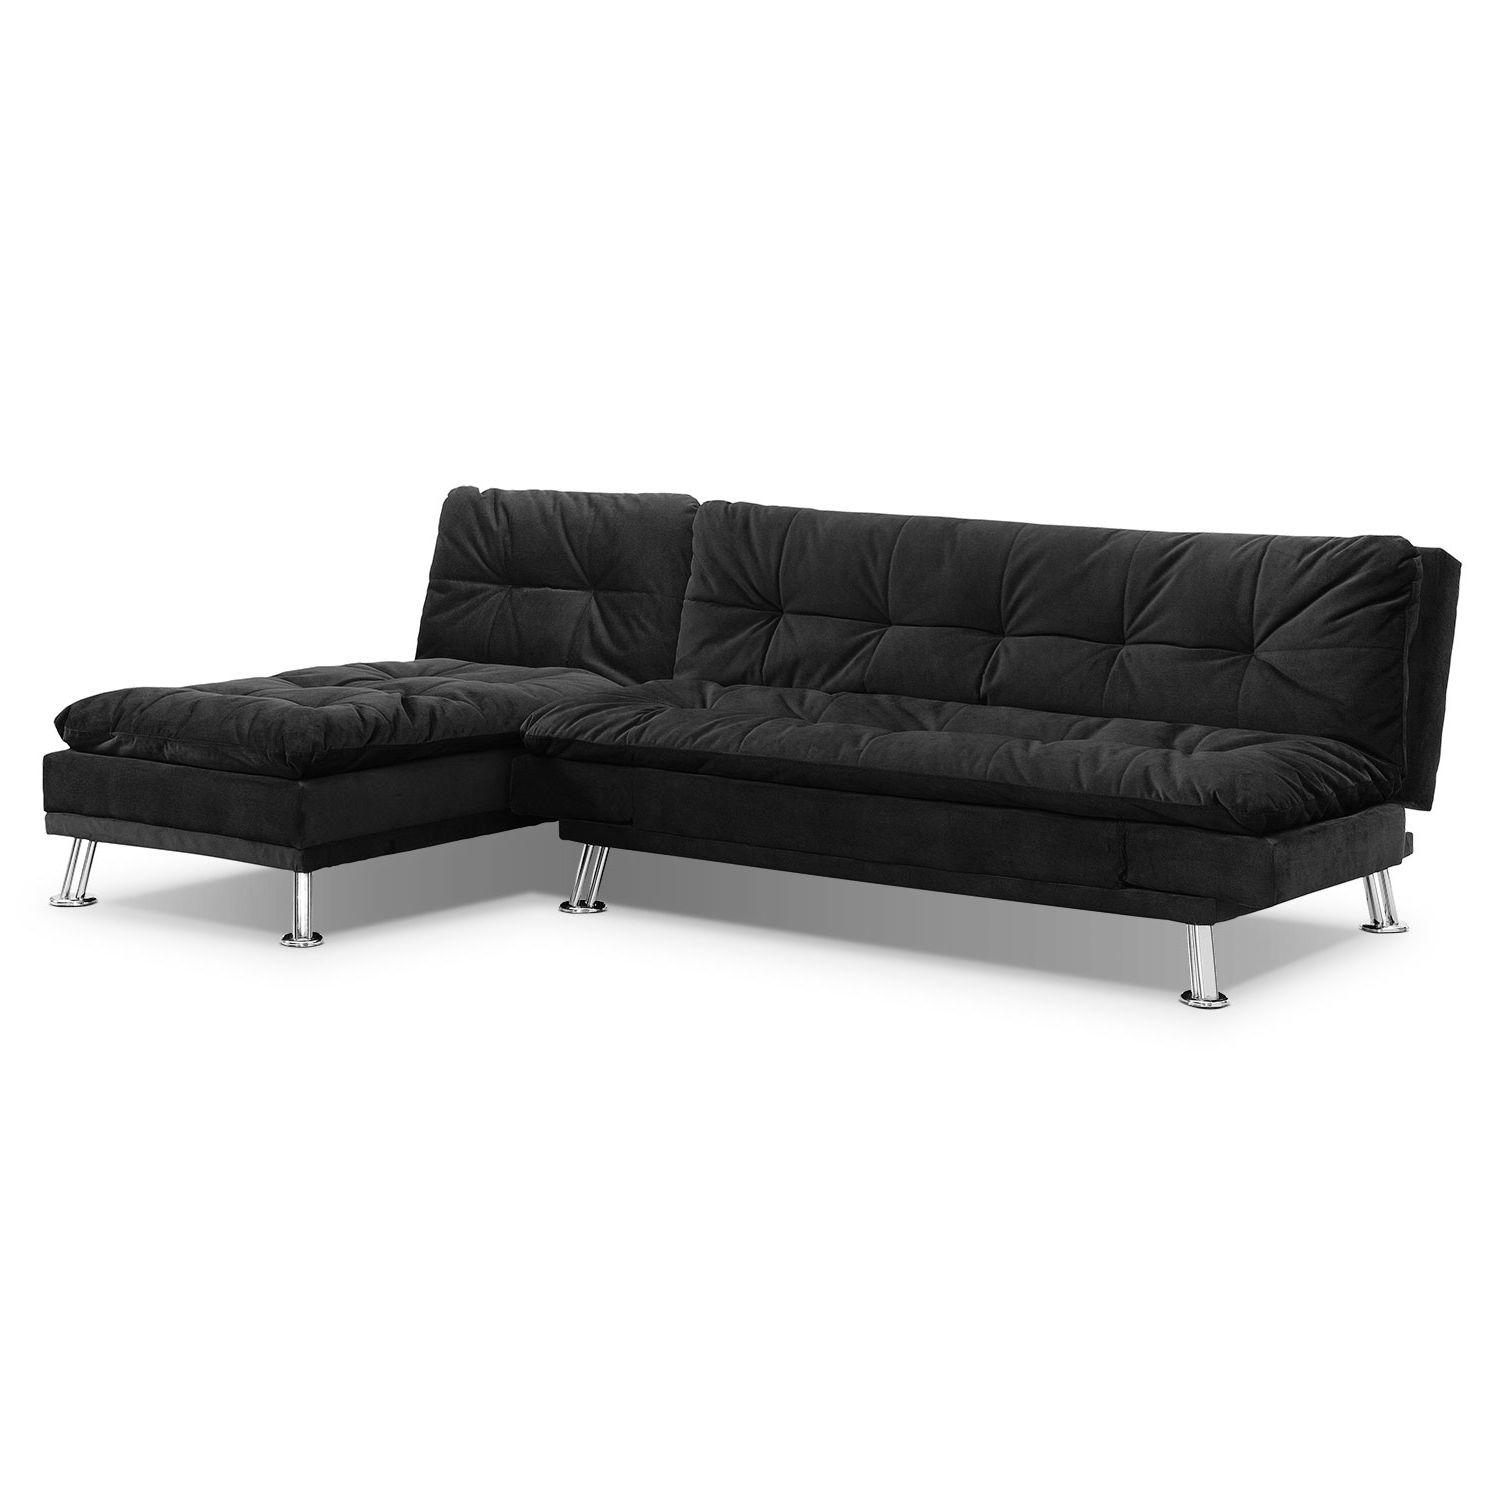 Futons With Chaise Lounge In Well Known Waltz Futon Sofa Bed With Chaise – Black (View 12 of 15)